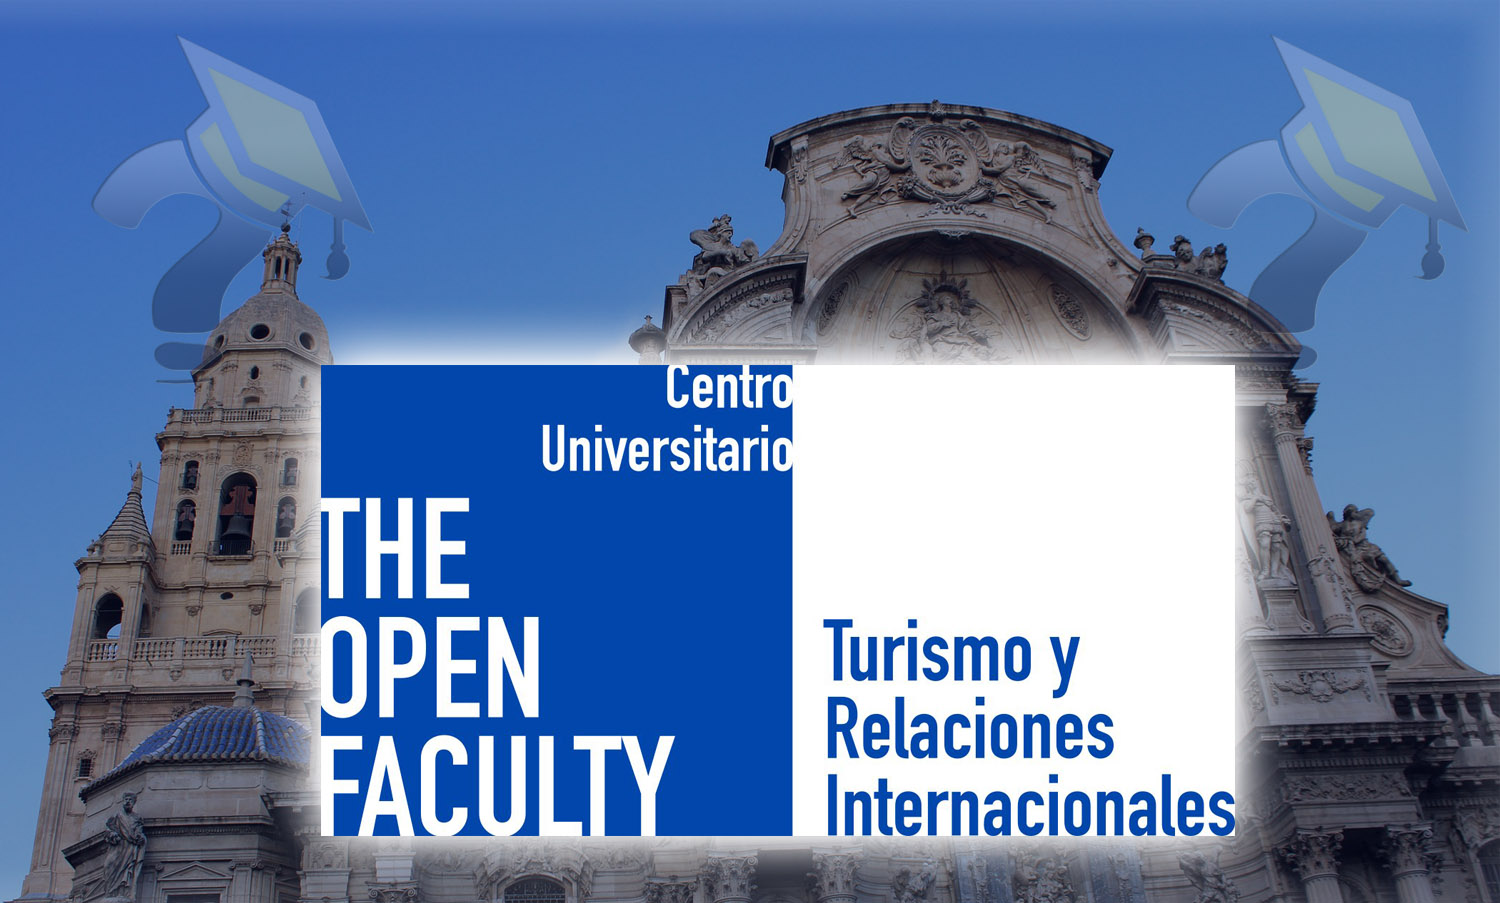 The Open Faculty